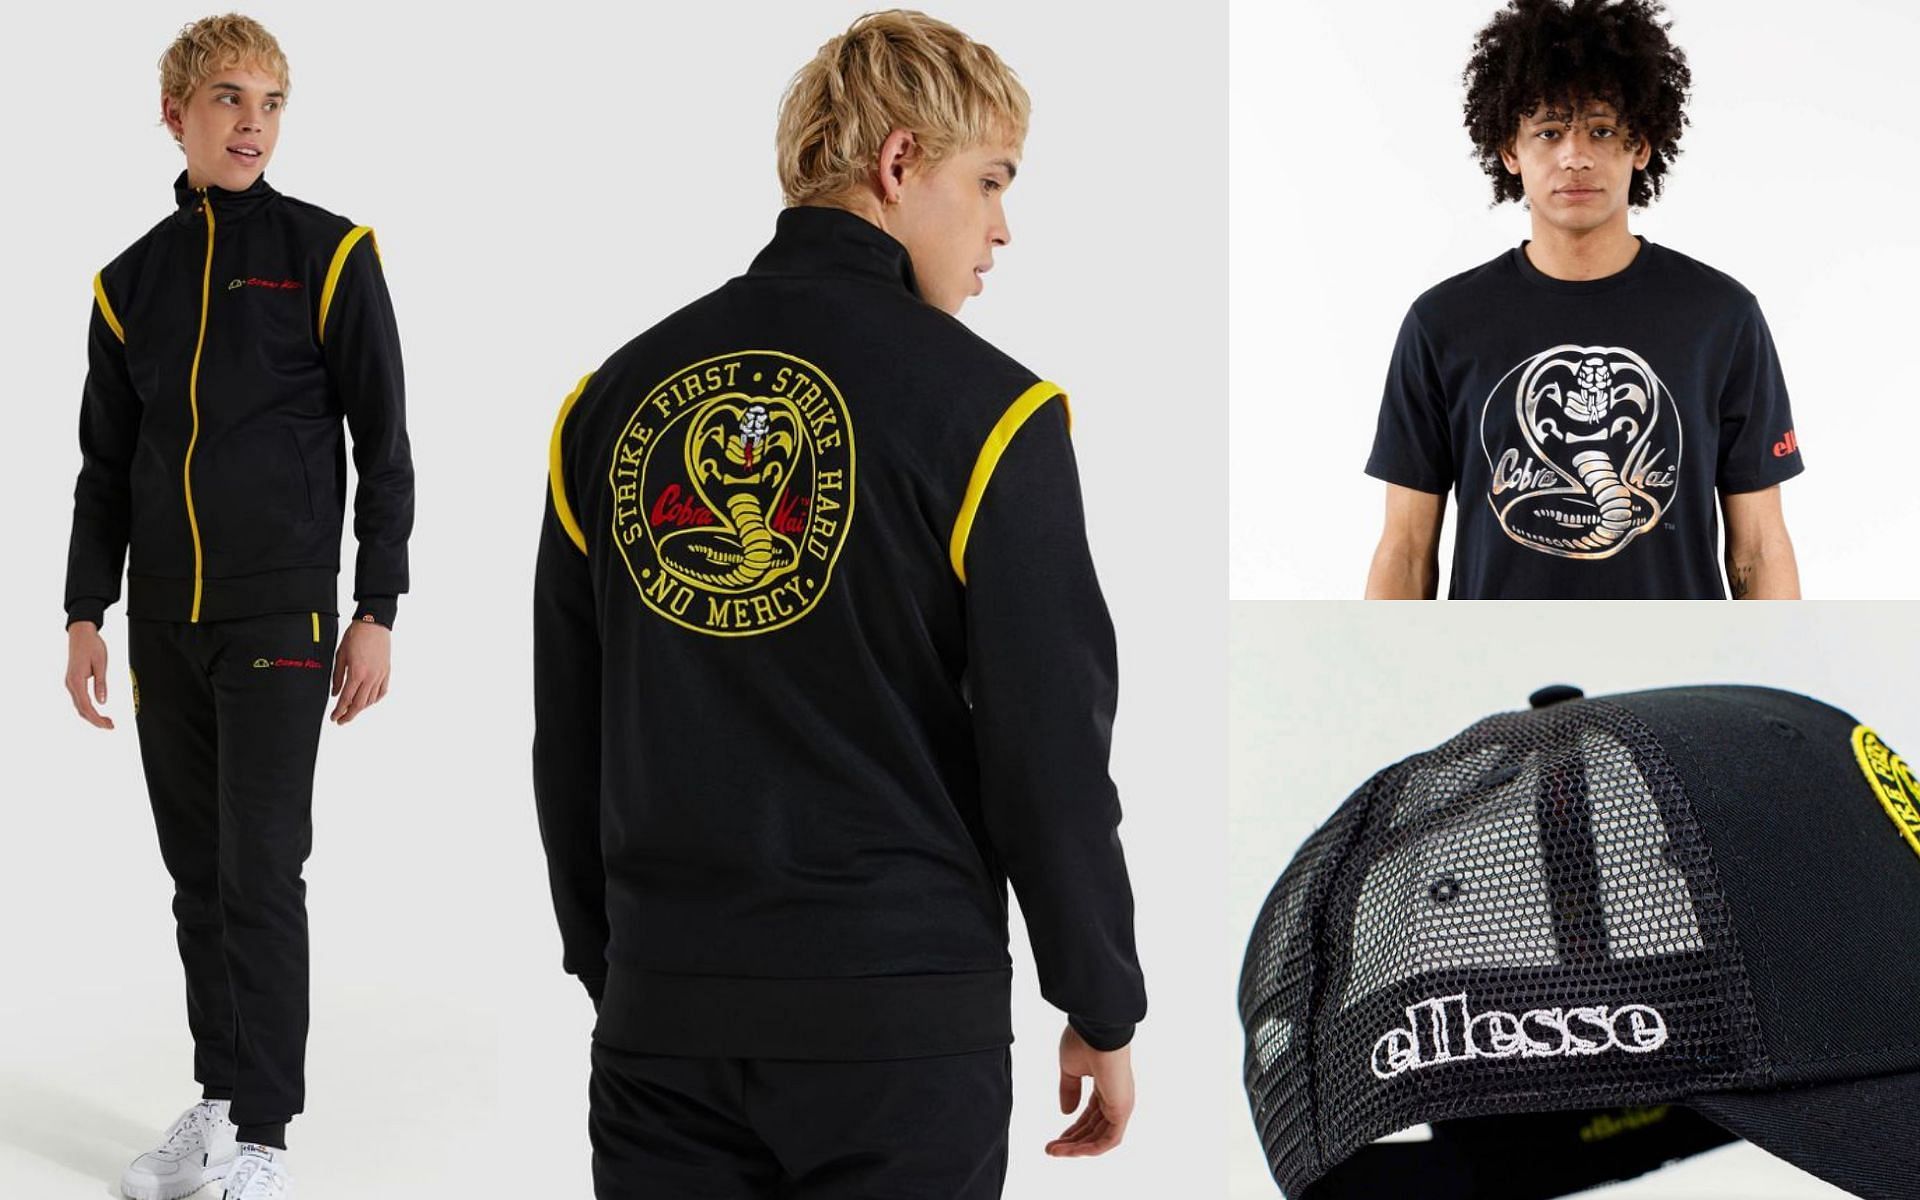 The Ellesse x Cobra Kai merchandise was launched recently (Image via DTLR)